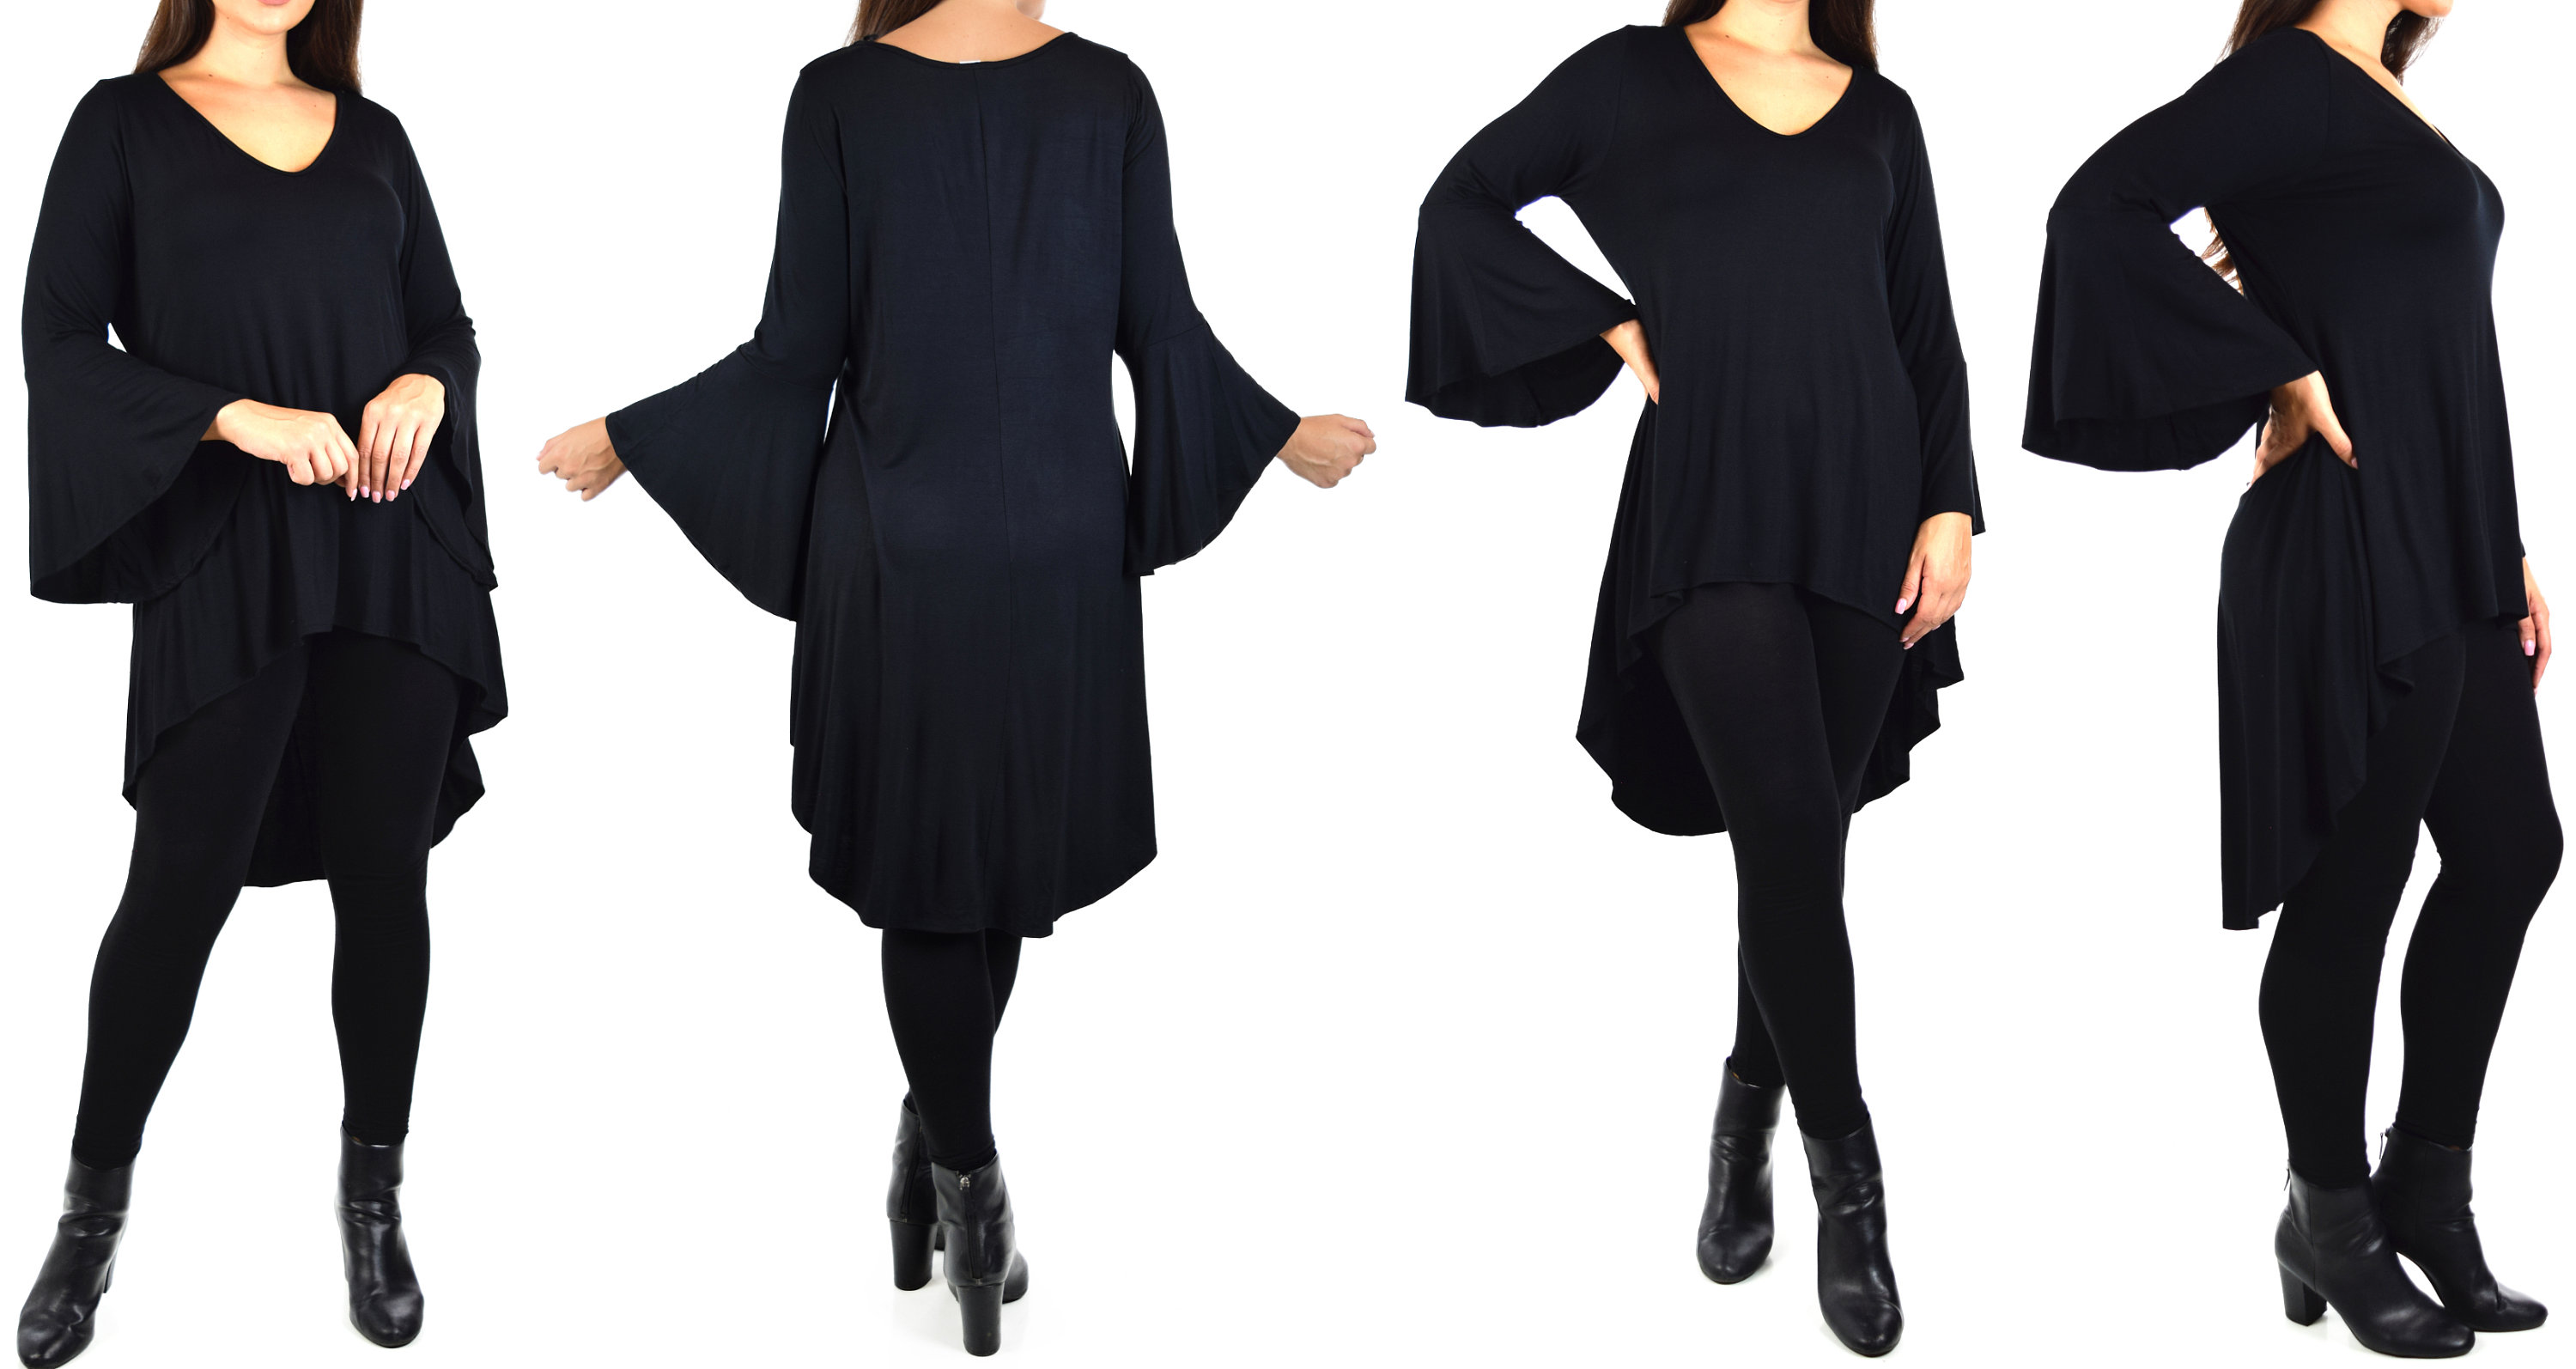 » Fat Goth Queen with a Boohoo Plus Cape Dress